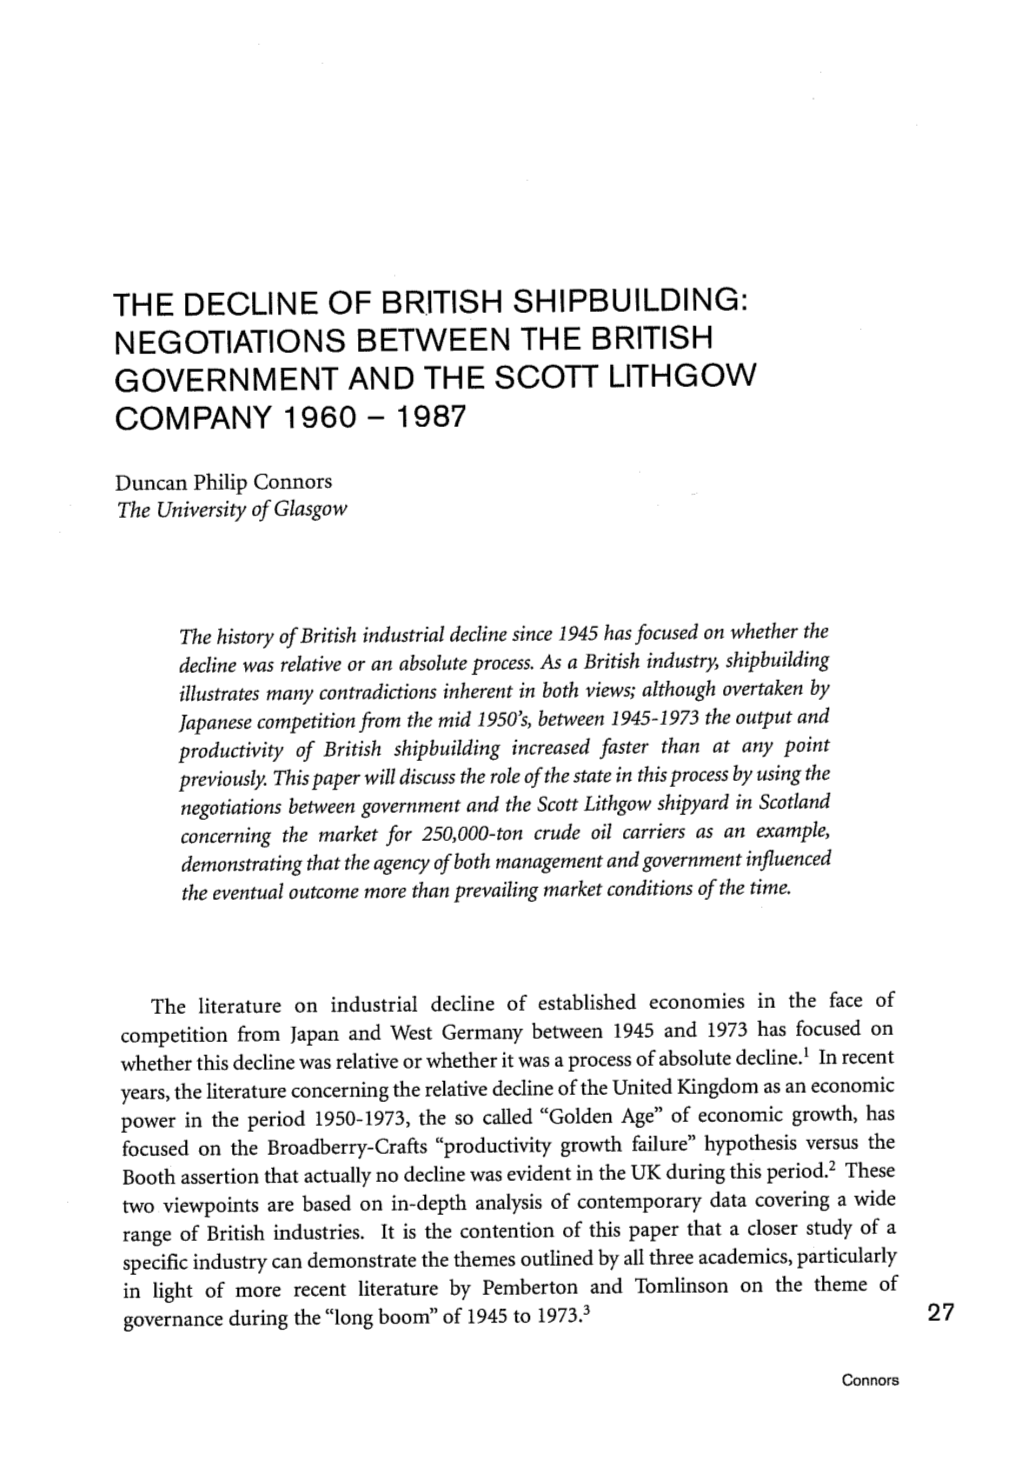 The Decline of British Shipbuilding: Negotiations Between the British Government and the Scott Lithgow Company 1960-1987